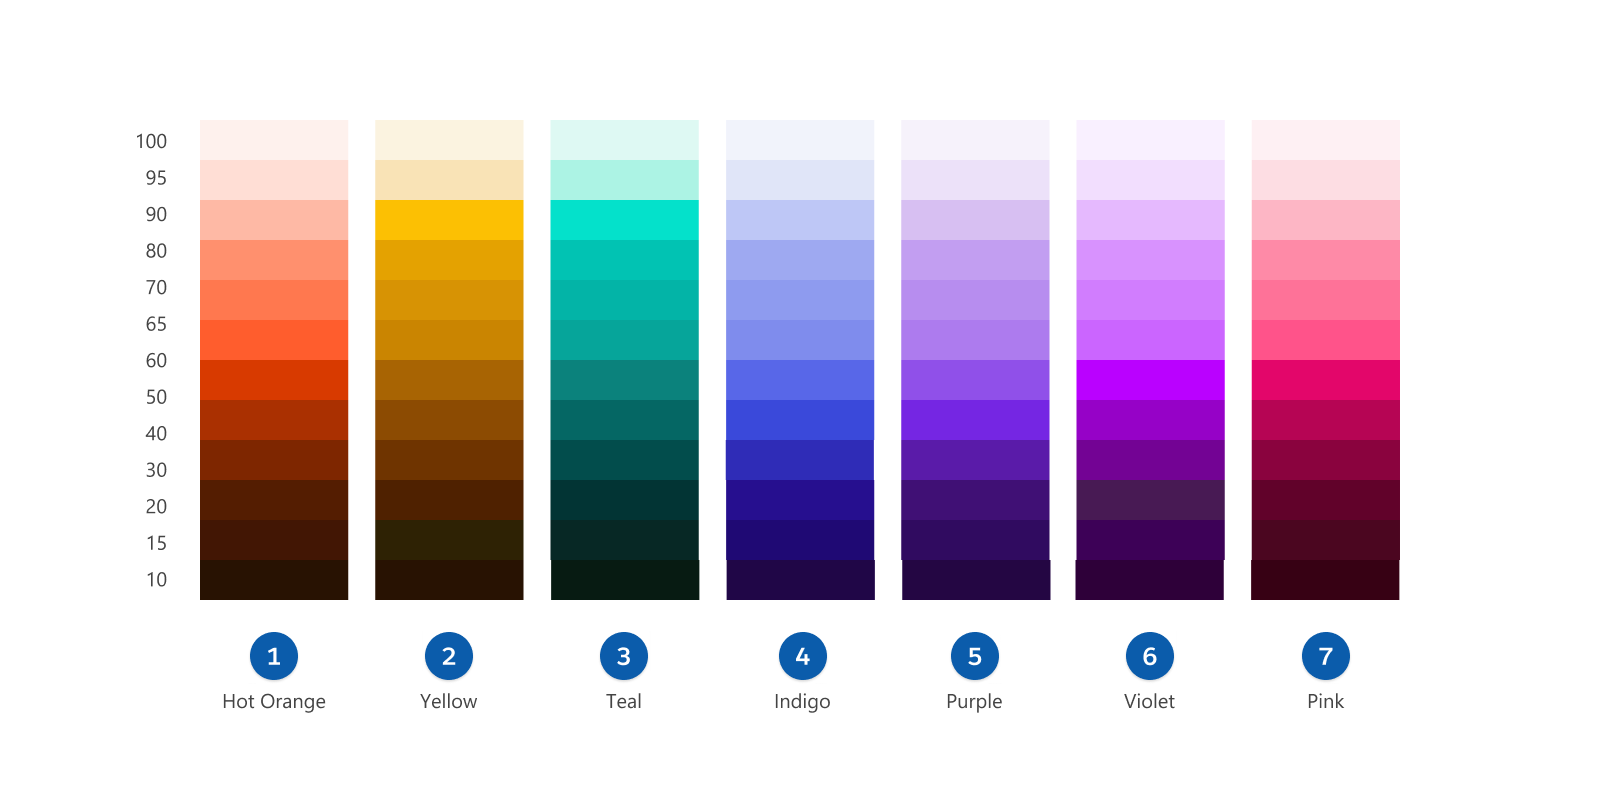 The  Salesforce Secondary Palette, composed of hot orange (1), yellow (2), teal (3), indigo (4), purple (5), violet (6), and pink (7) color patterns.